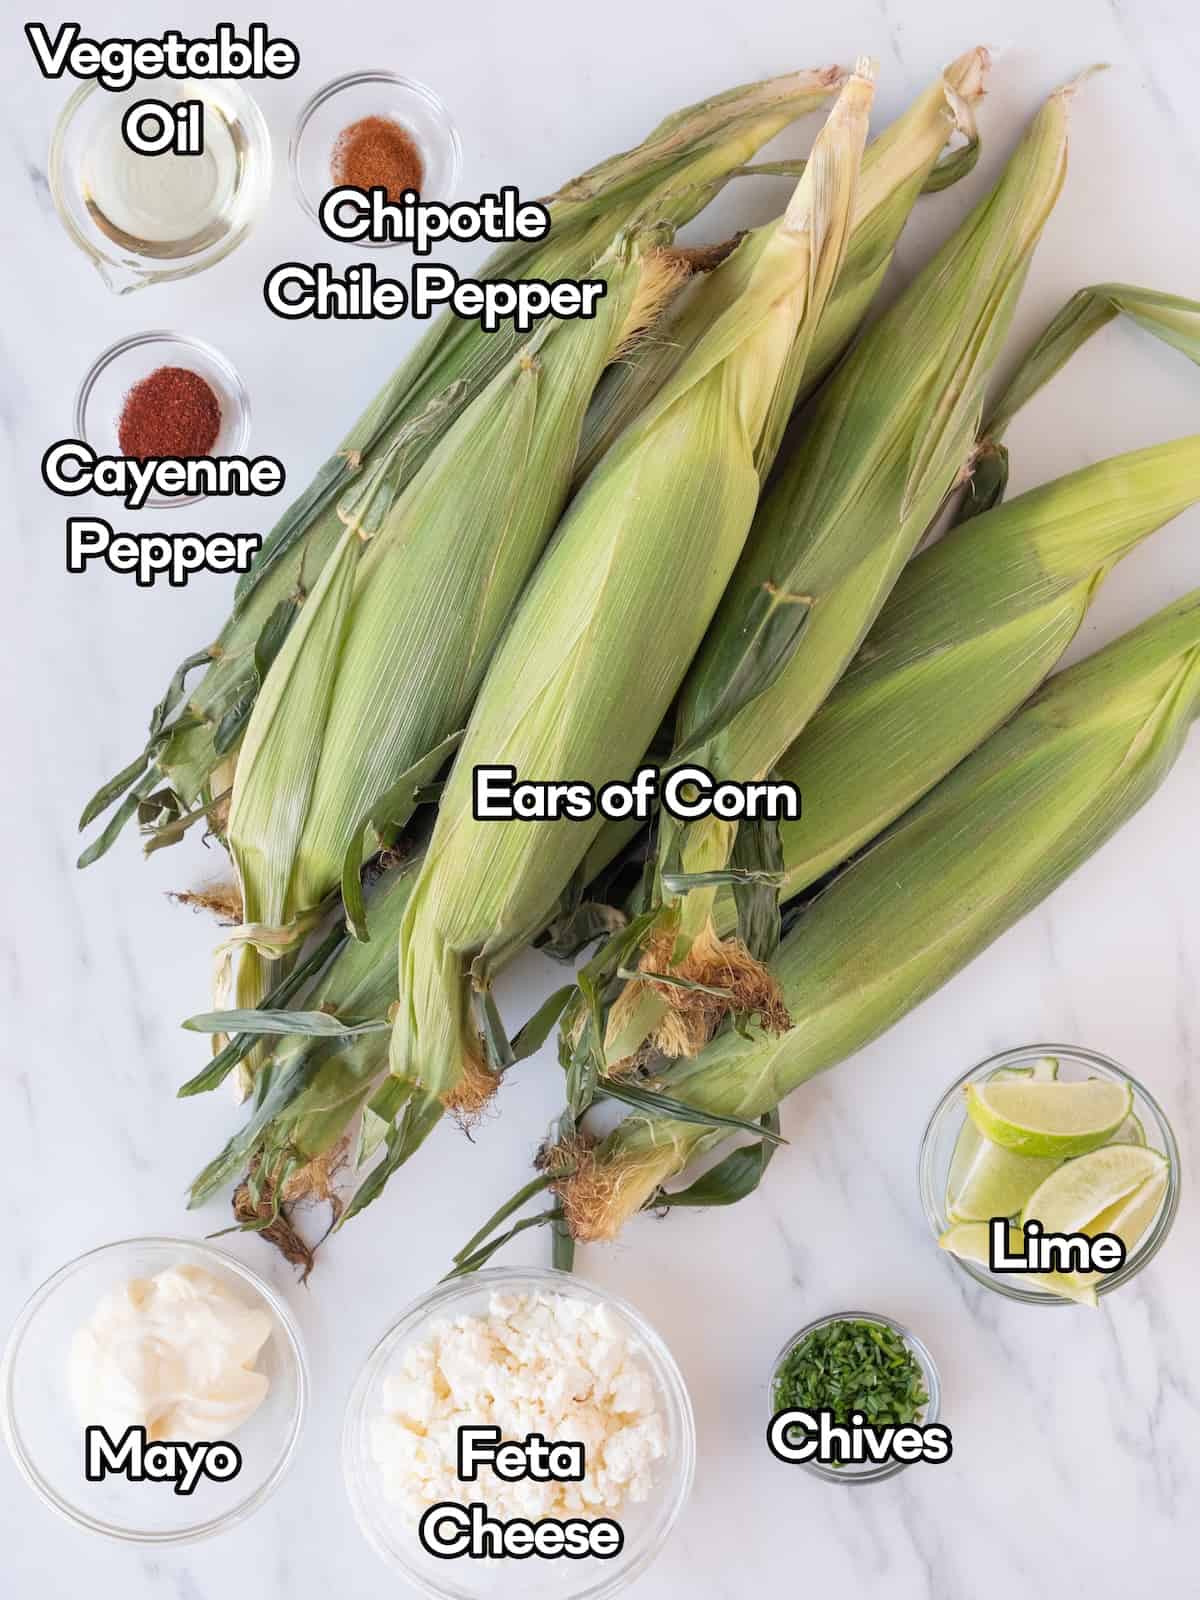 Mise-en-place of all the ingredients to. make Mexican grilled corn.